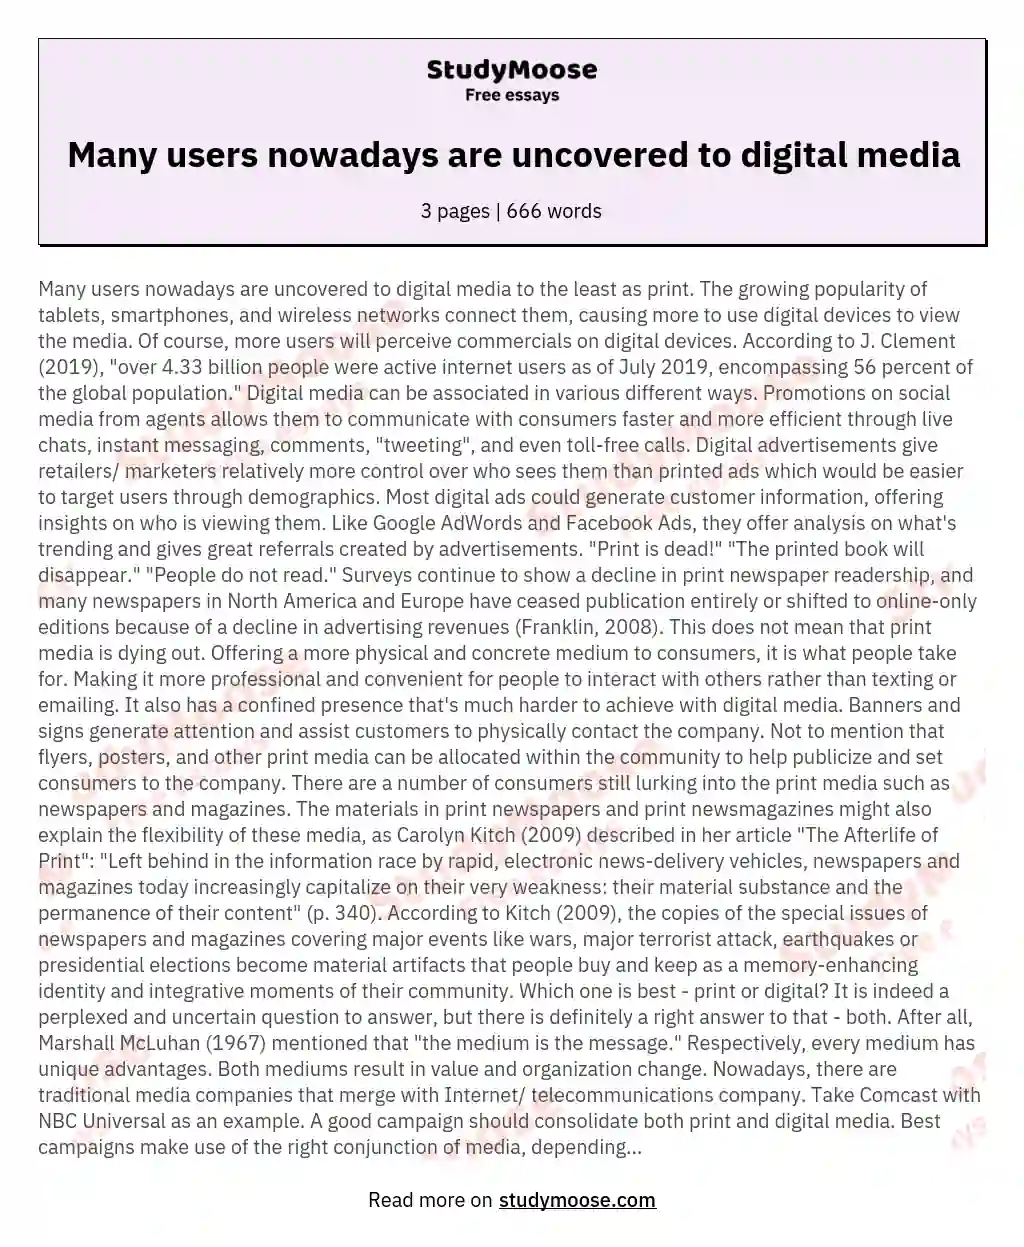 Many users nowadays are uncovered to digital media essay